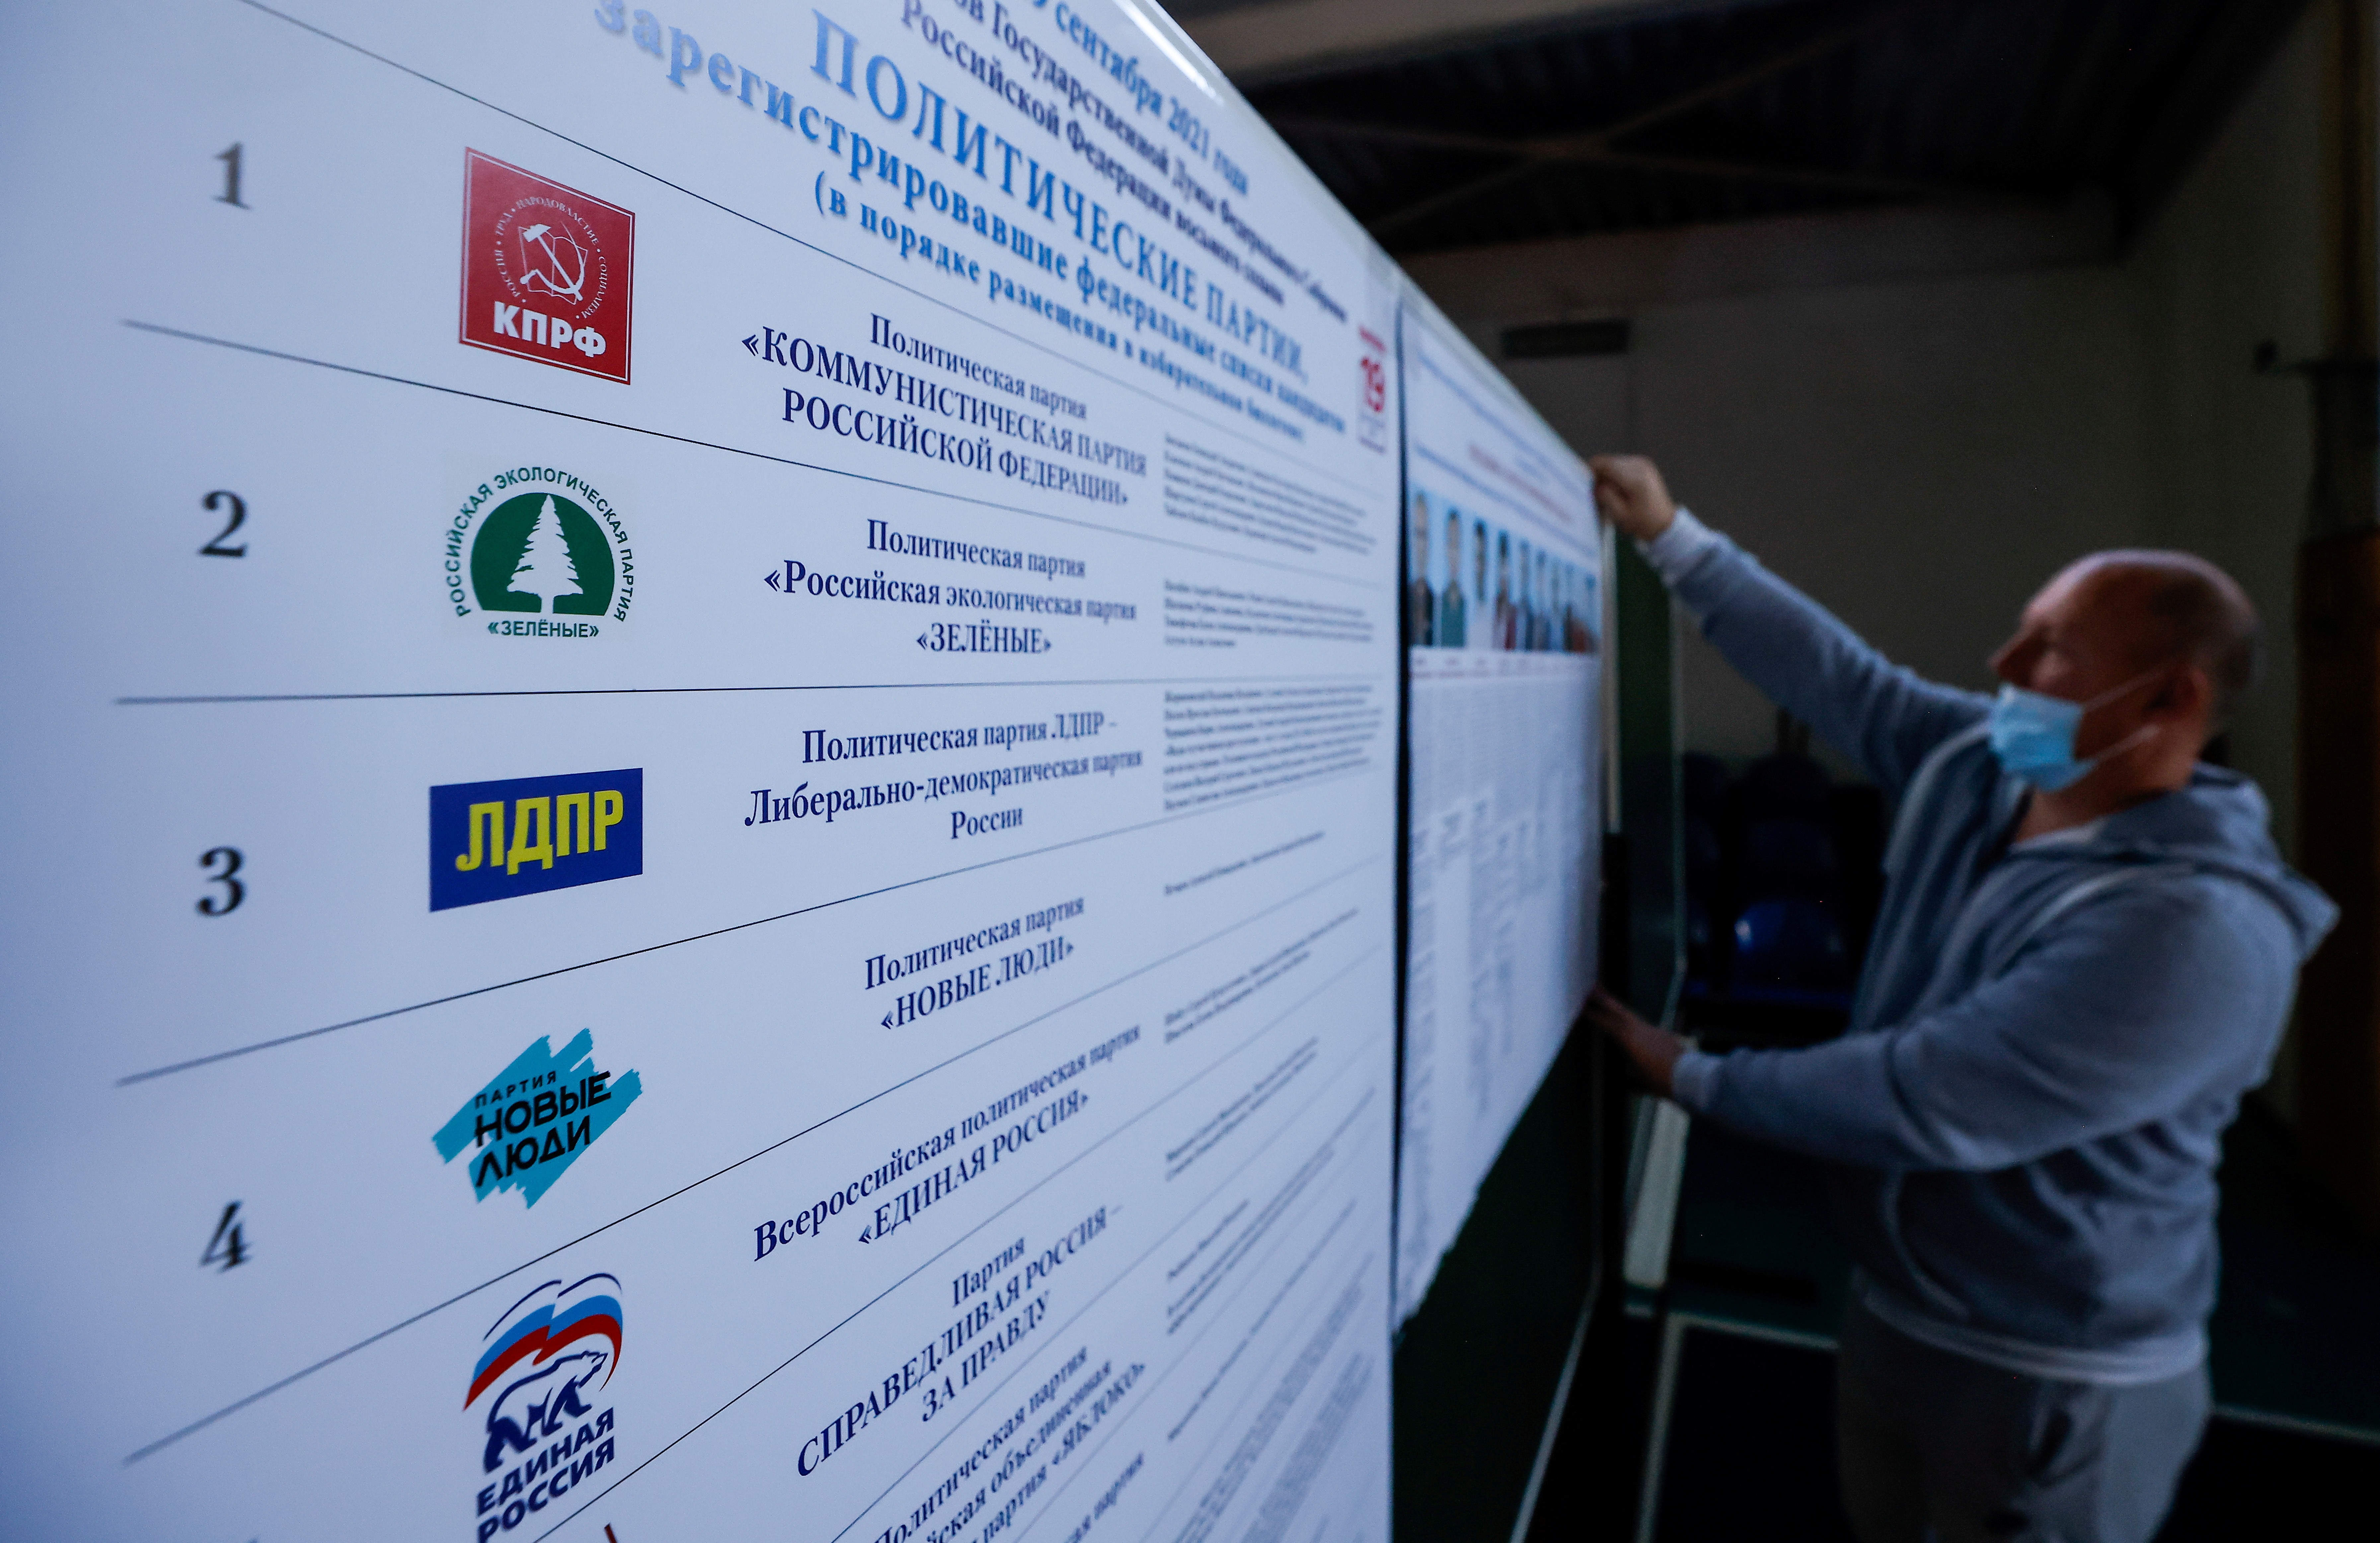 A member of local election committee attaches a poster with pictures of candidates at a polling station ahead of parliamentary elections in the village of Ivolginsk